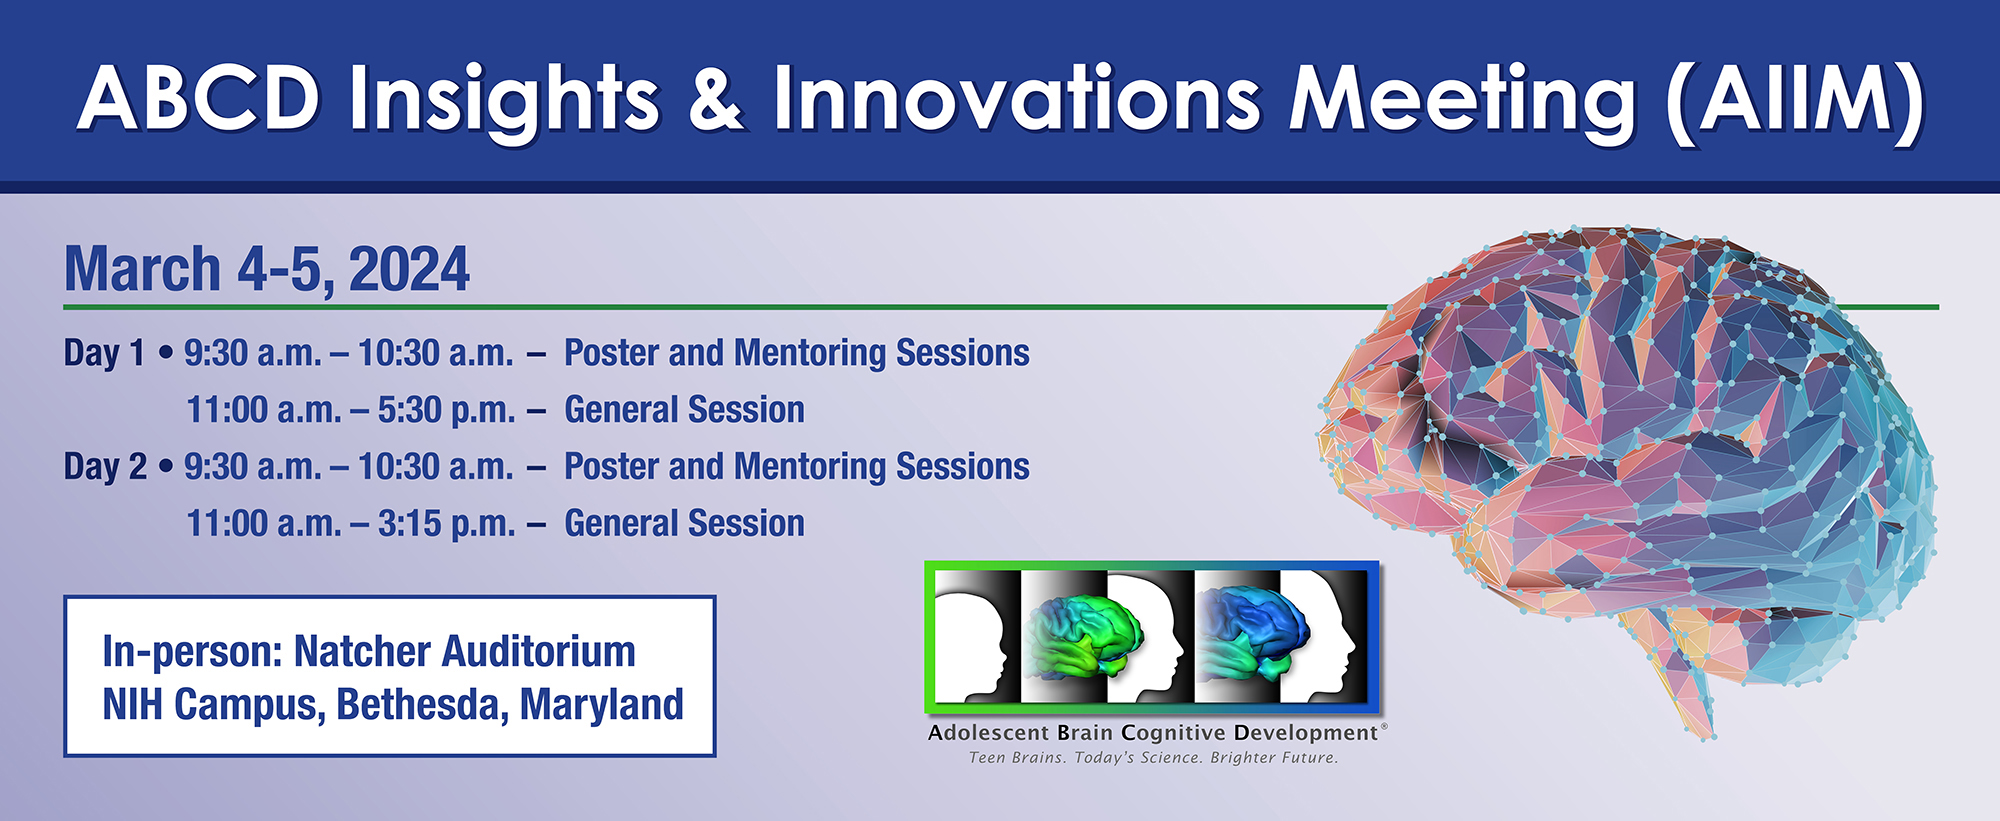 ABCD Insights & Innovations Meeting (AIIM)